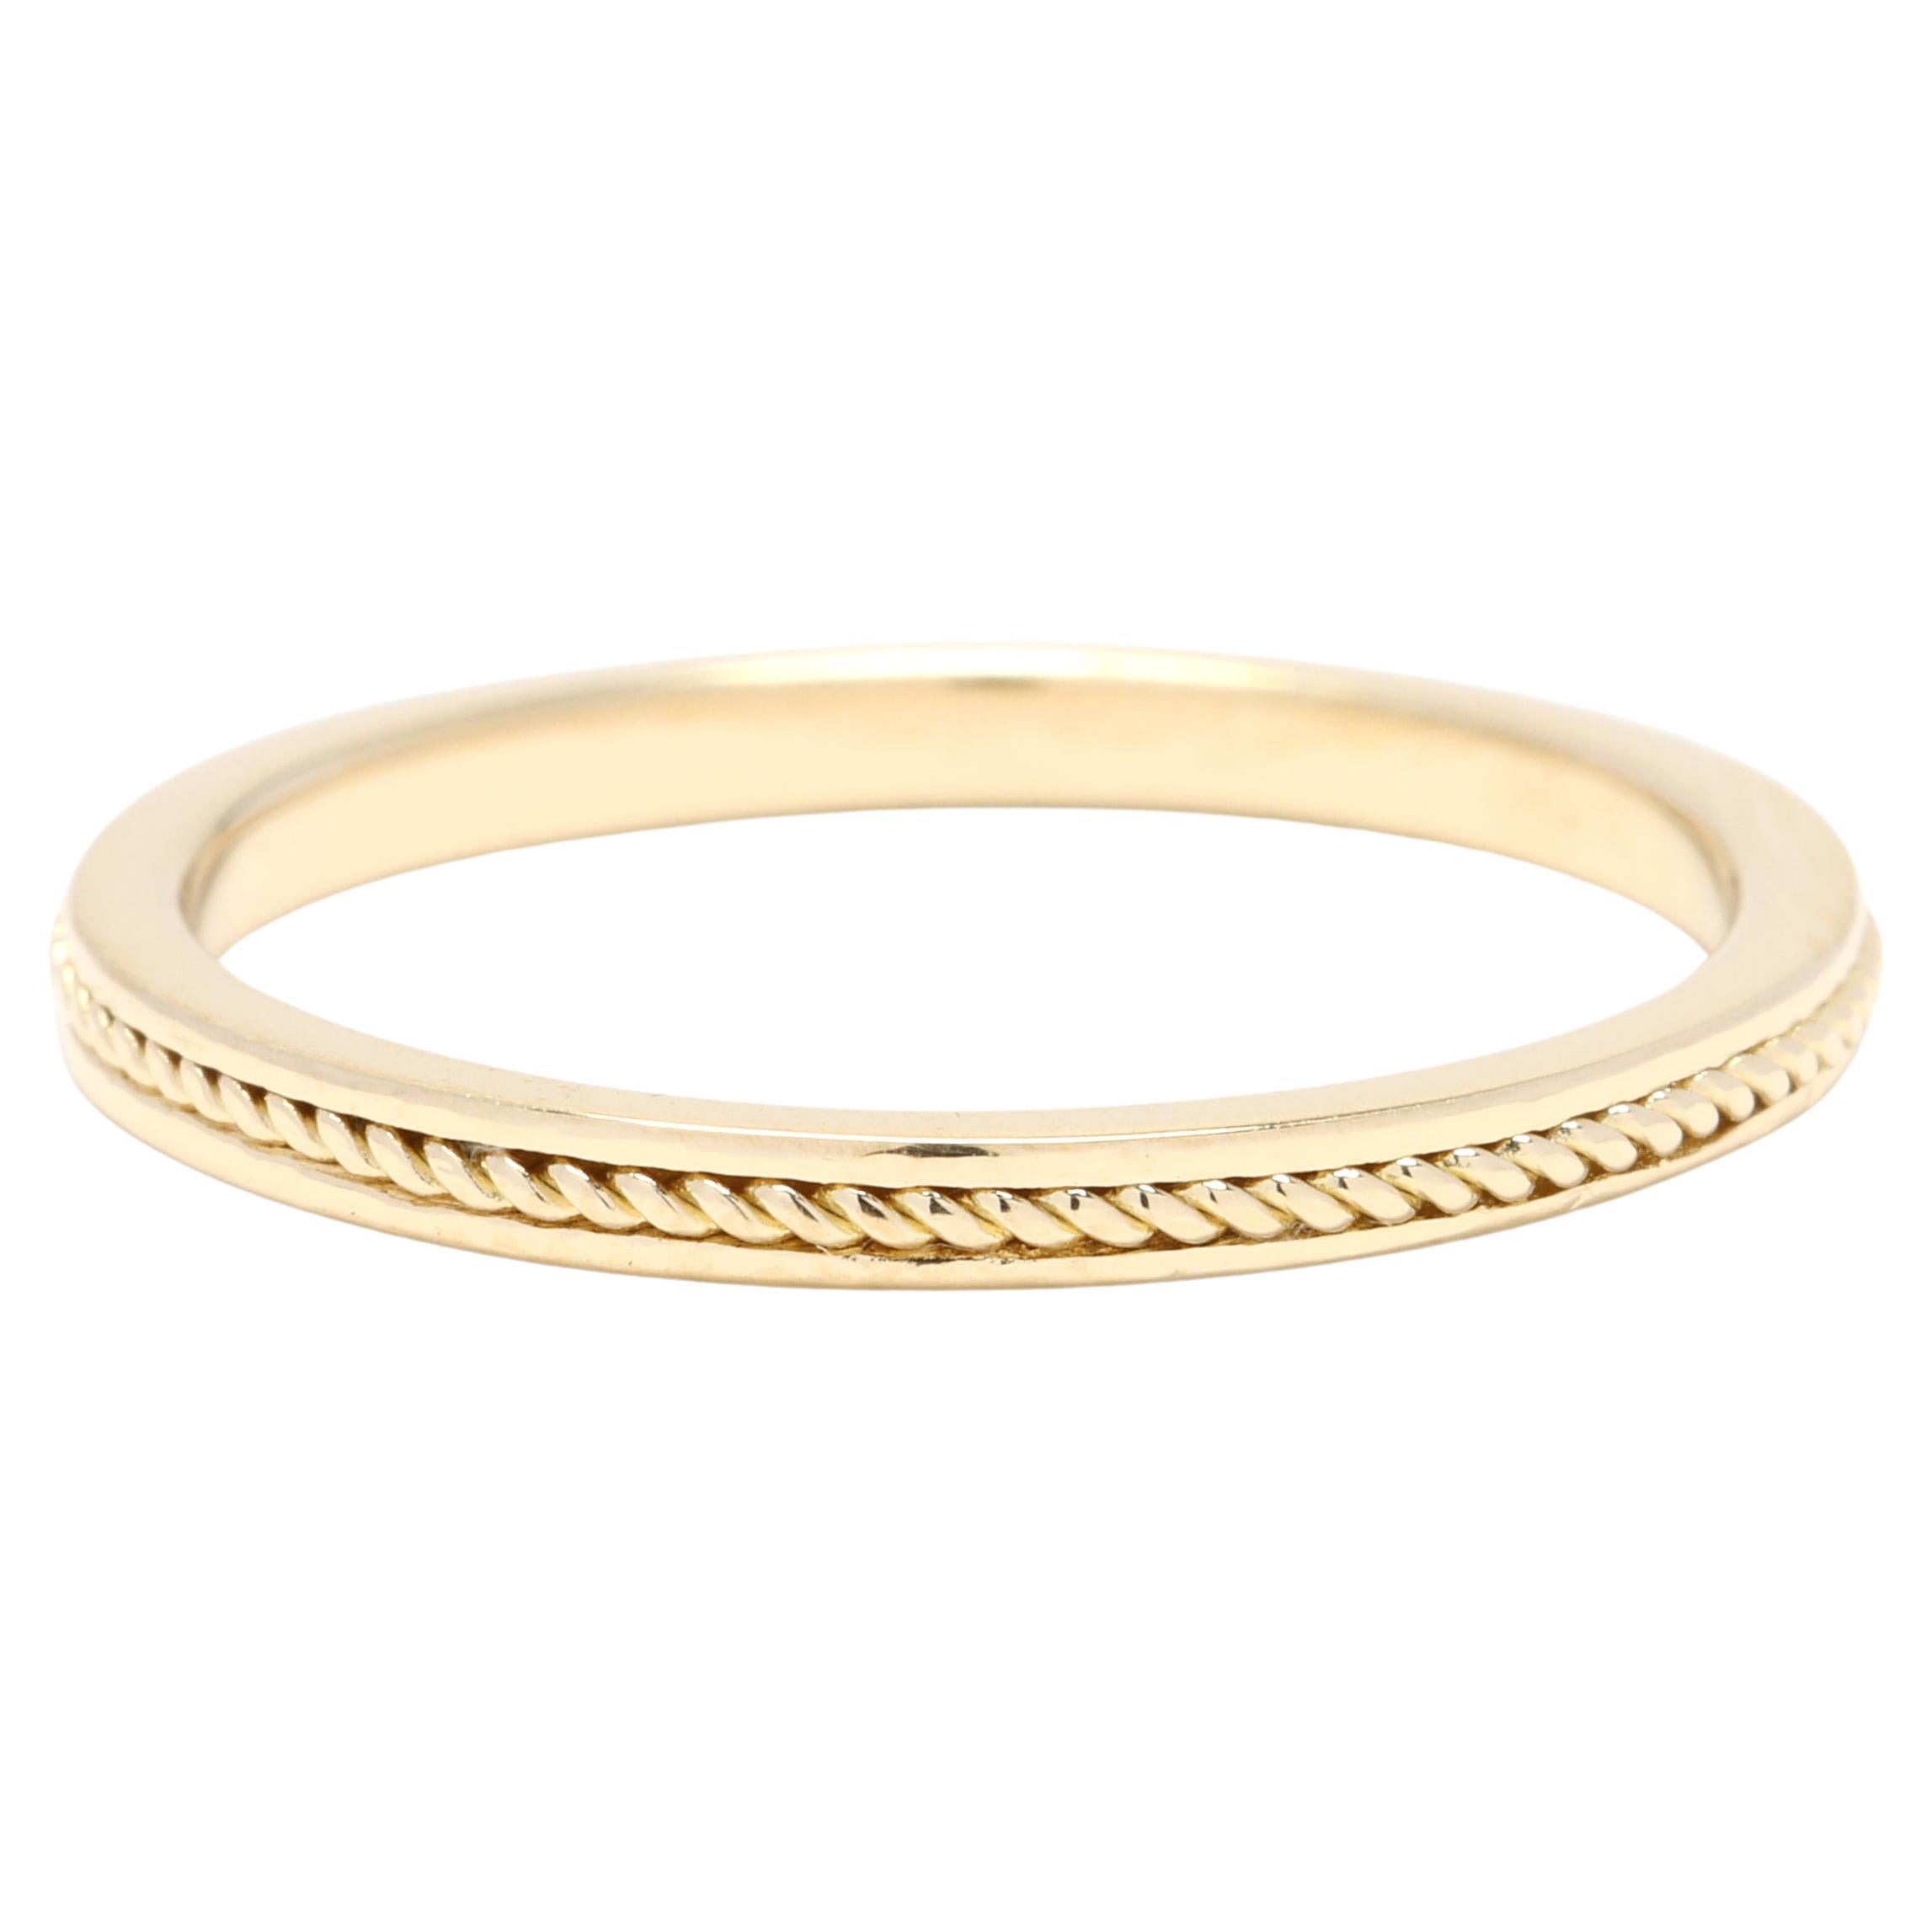 Hidalgo Gold Band Ring, 18k Yellow Gold, Ring Size 5.75, Rope Band Ring For Sale